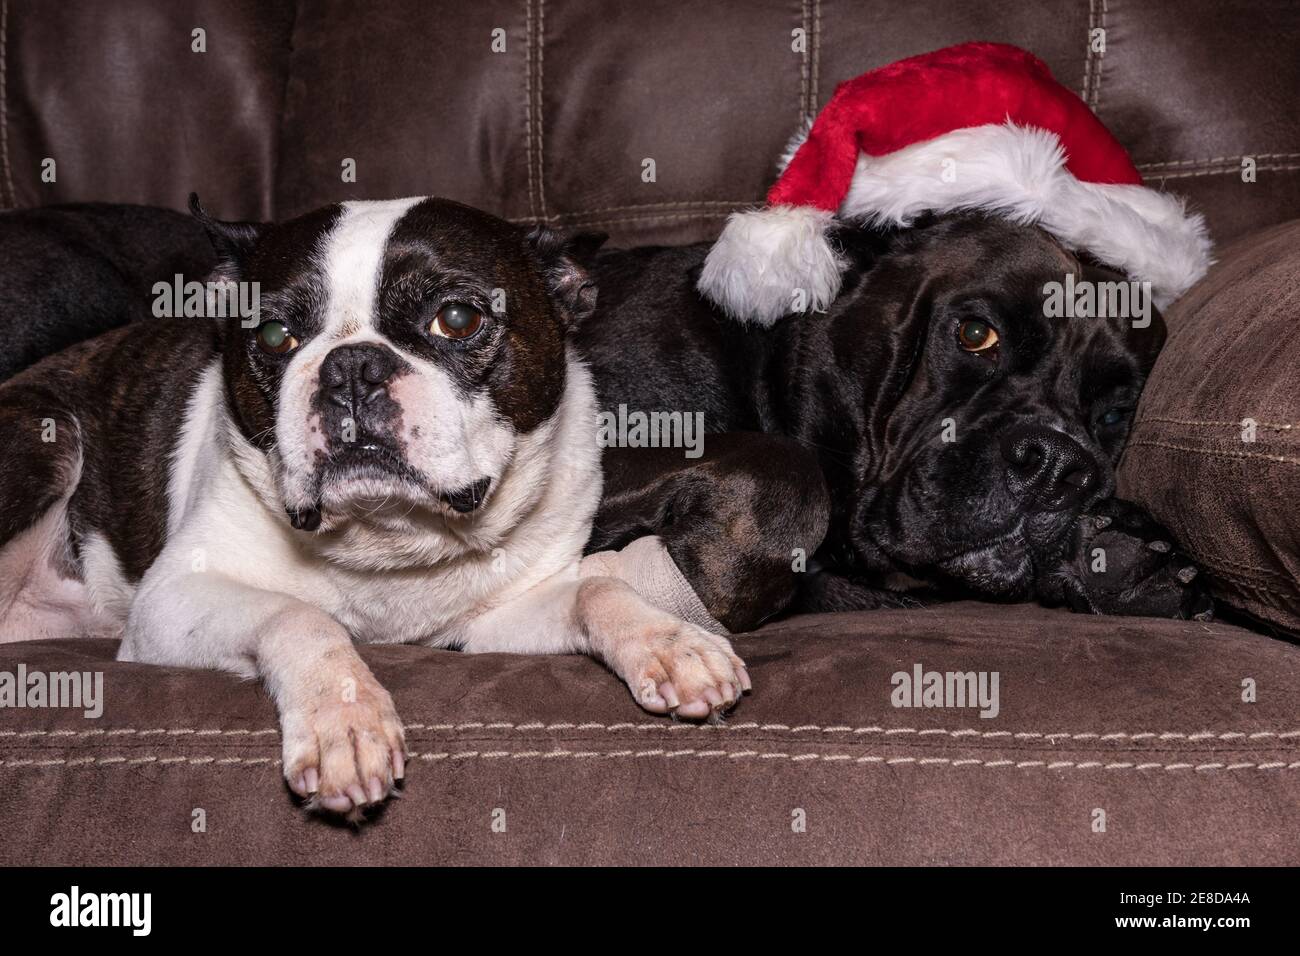 Older Boston Terrier with cataracts and a younger Labrador-cross with santa hat on a couch Stock Photo